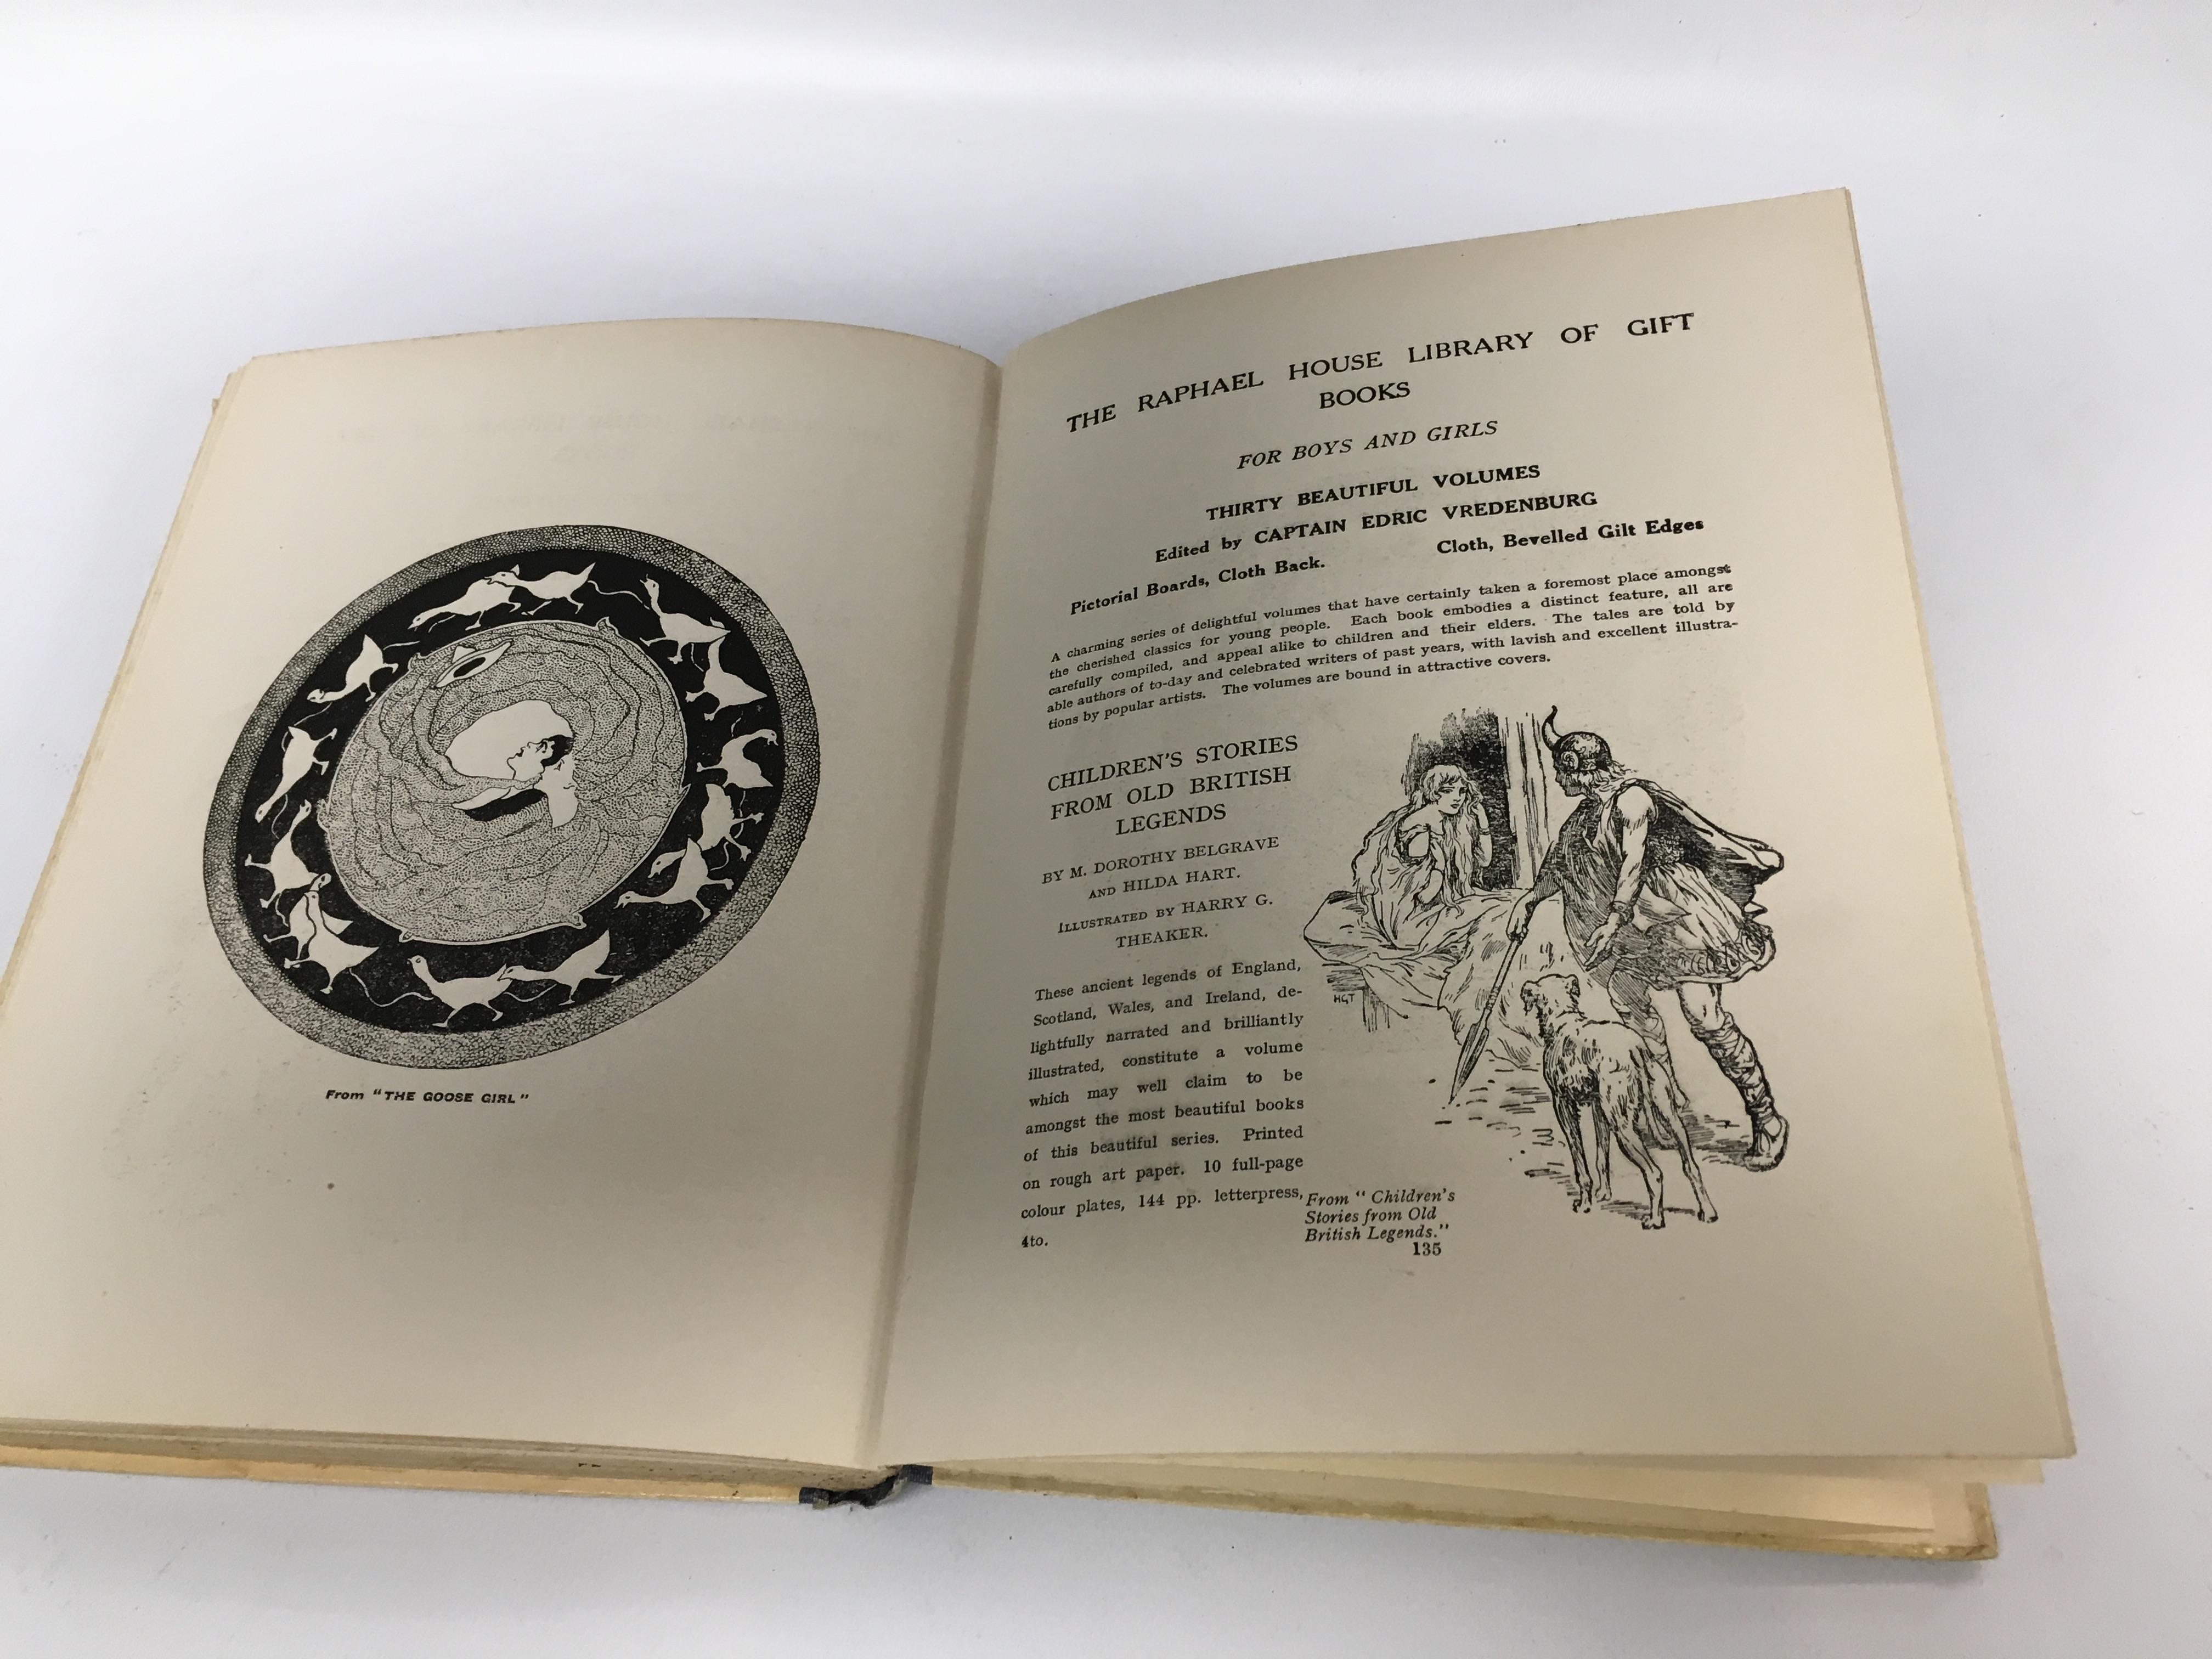 Collection of books of Fairy tales (most showing wear) including: Hans Andersen's Fairy Tales. - Image 4 of 10